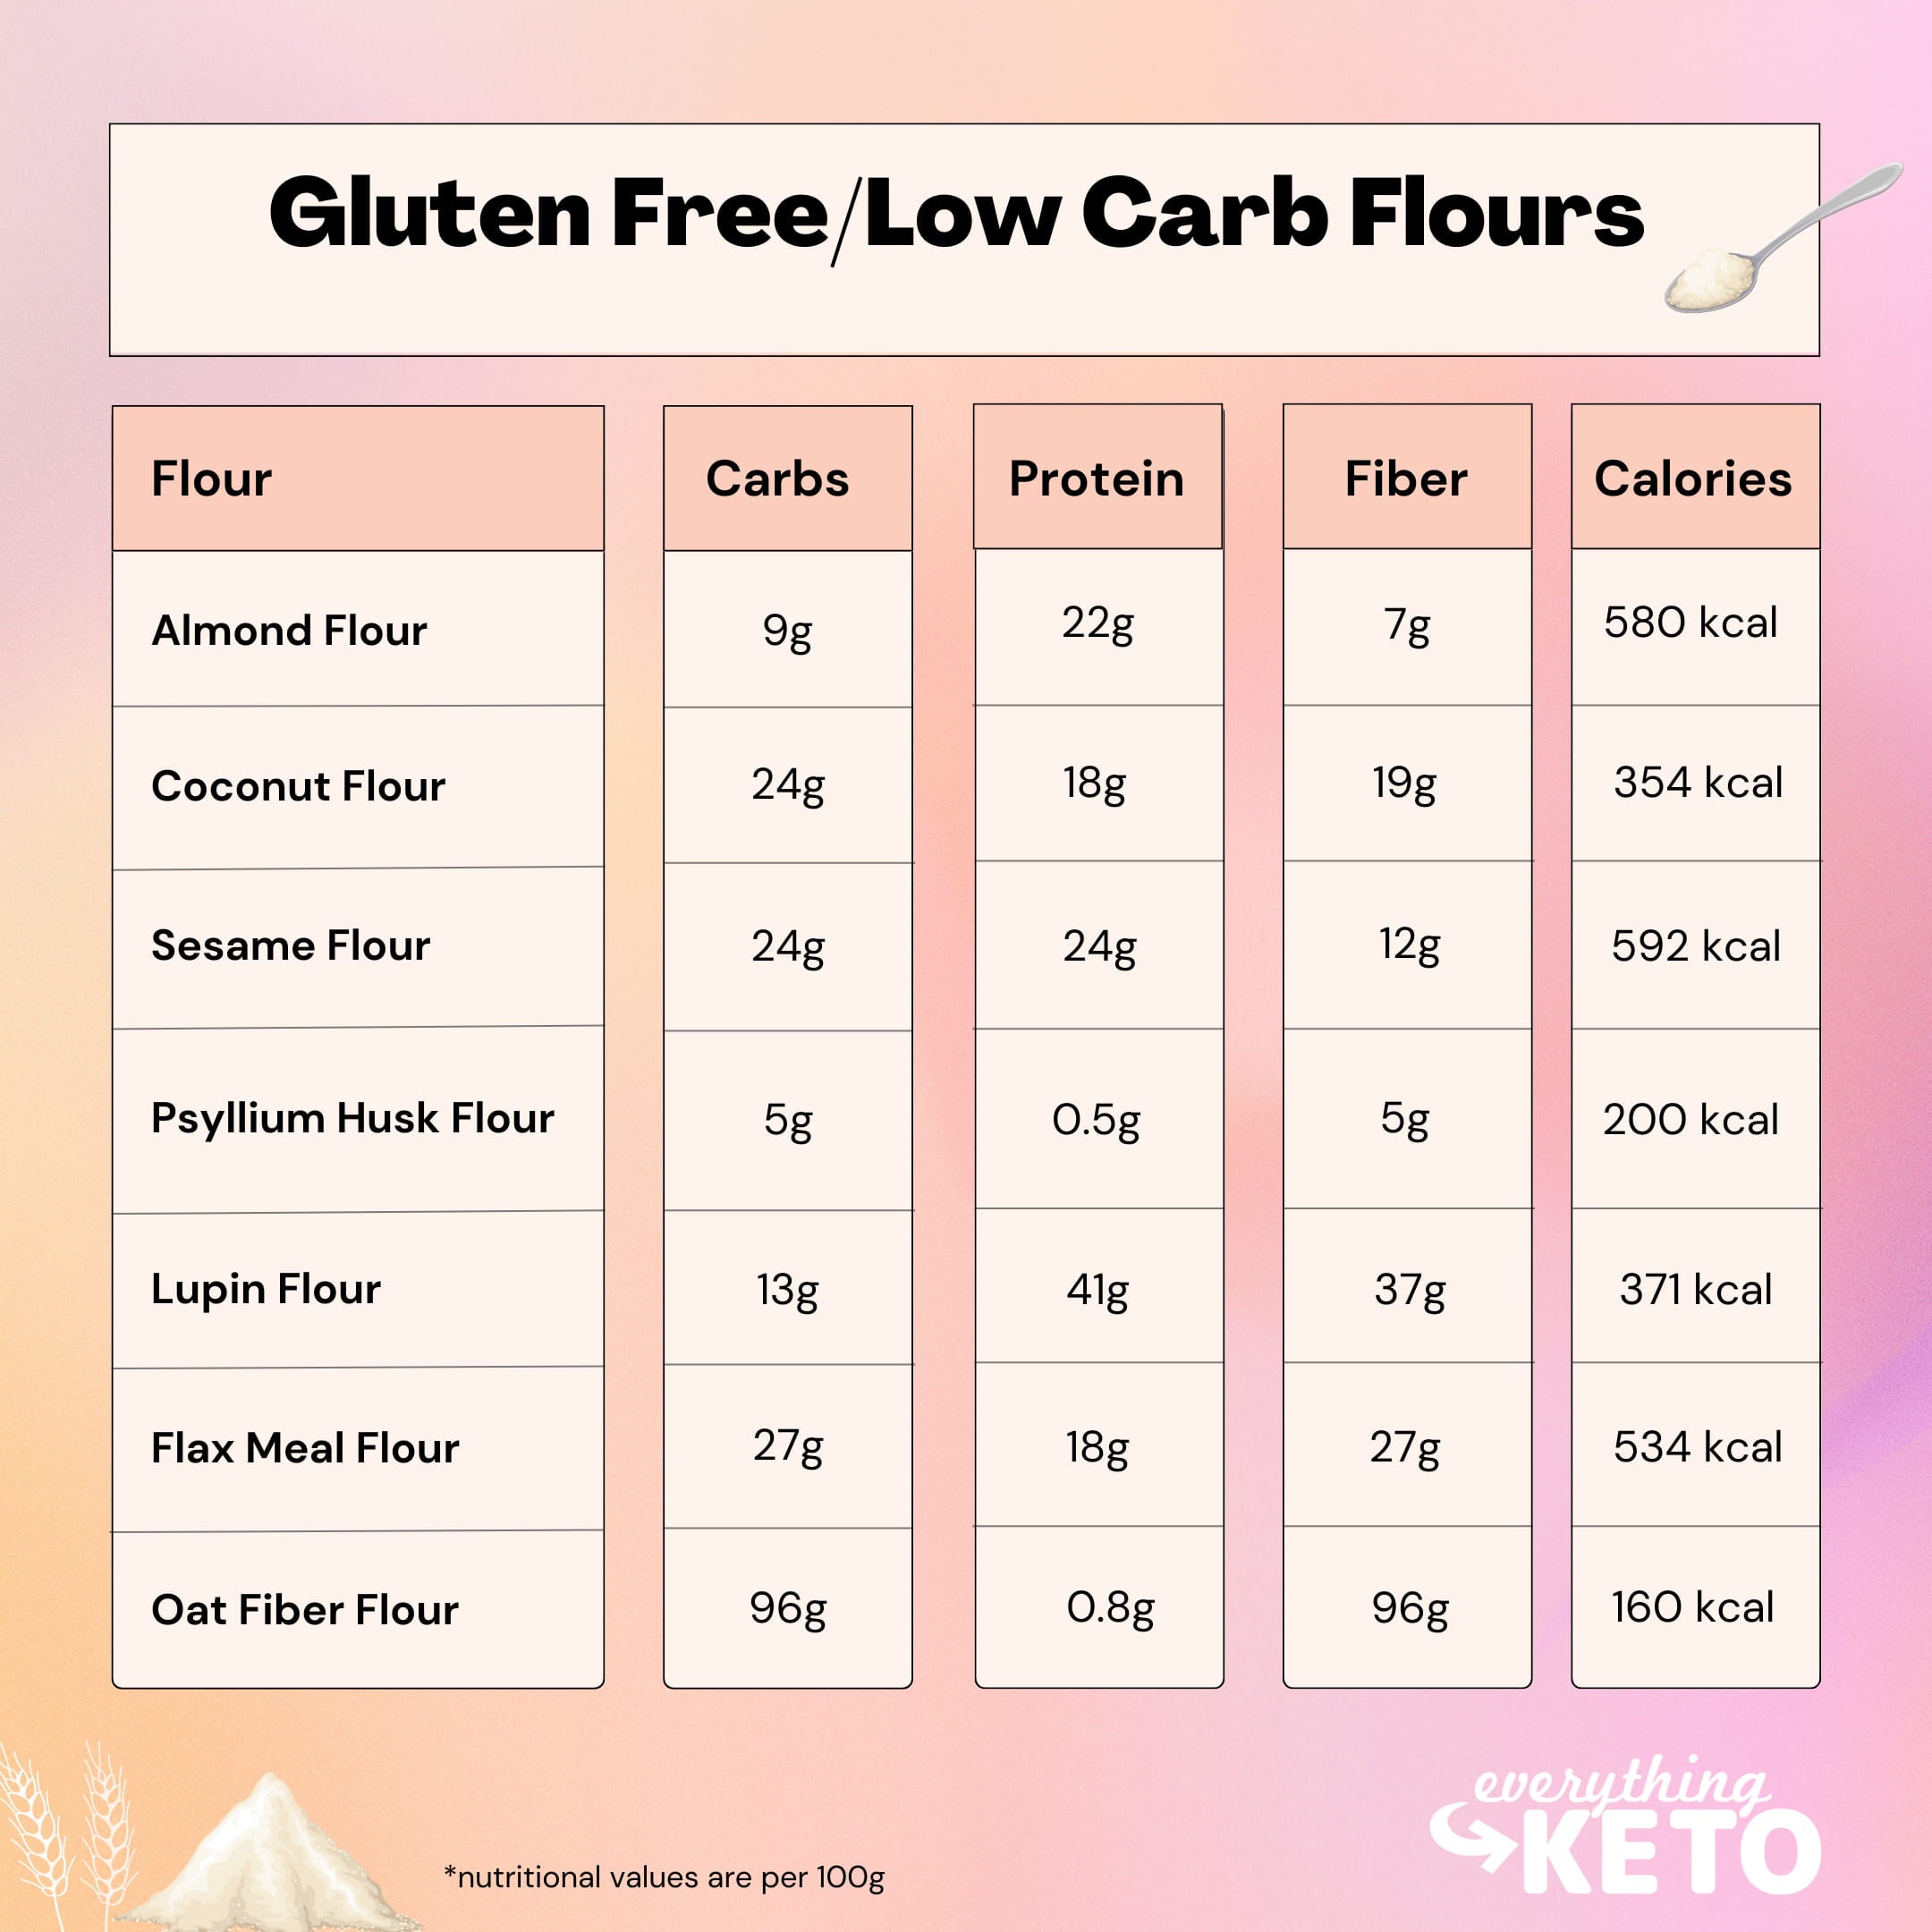 Are 'diet', 'low-carb' or 'gluten-free' labels your diet